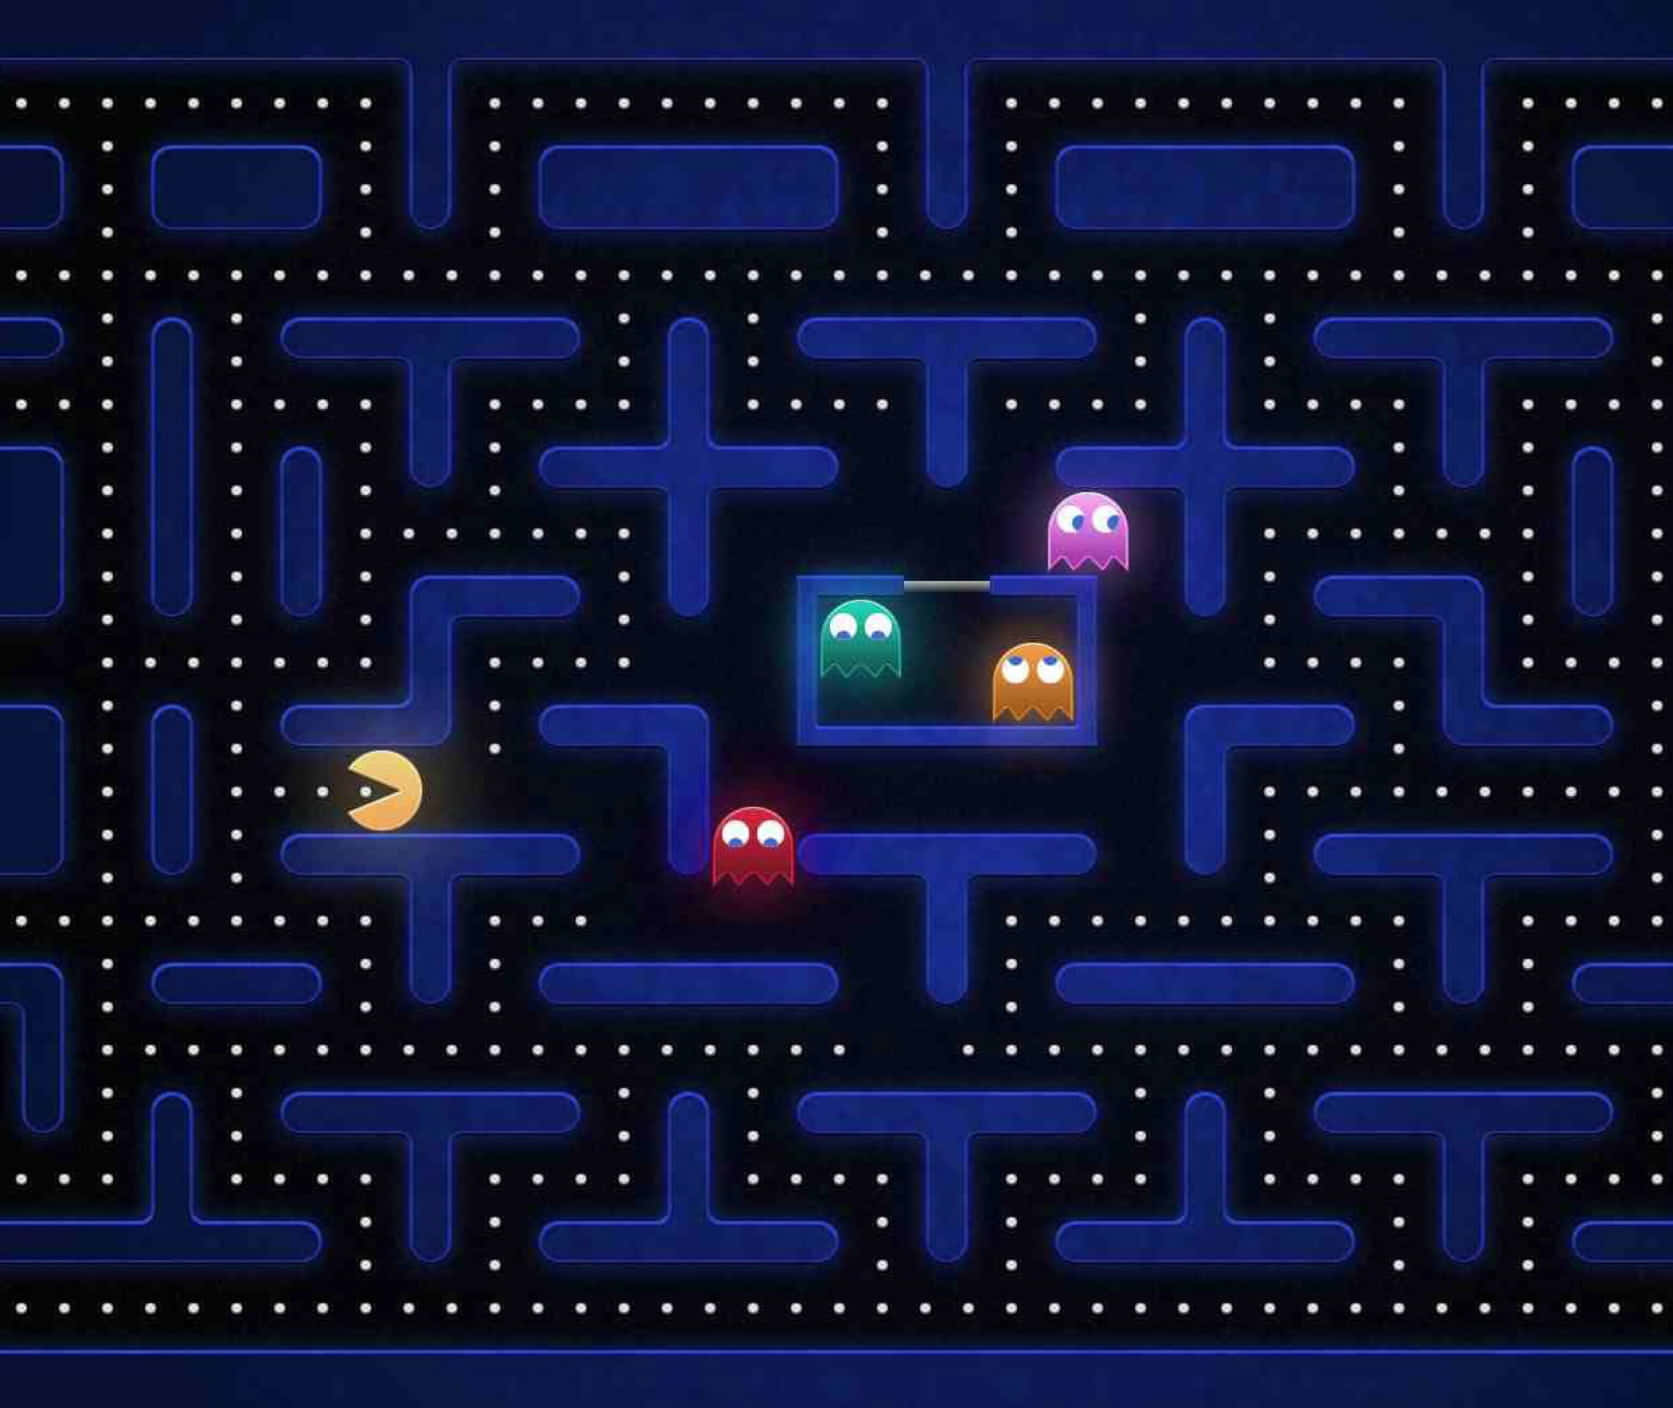 Go for the gold, gobble up points to reach the highest score in Pacman!